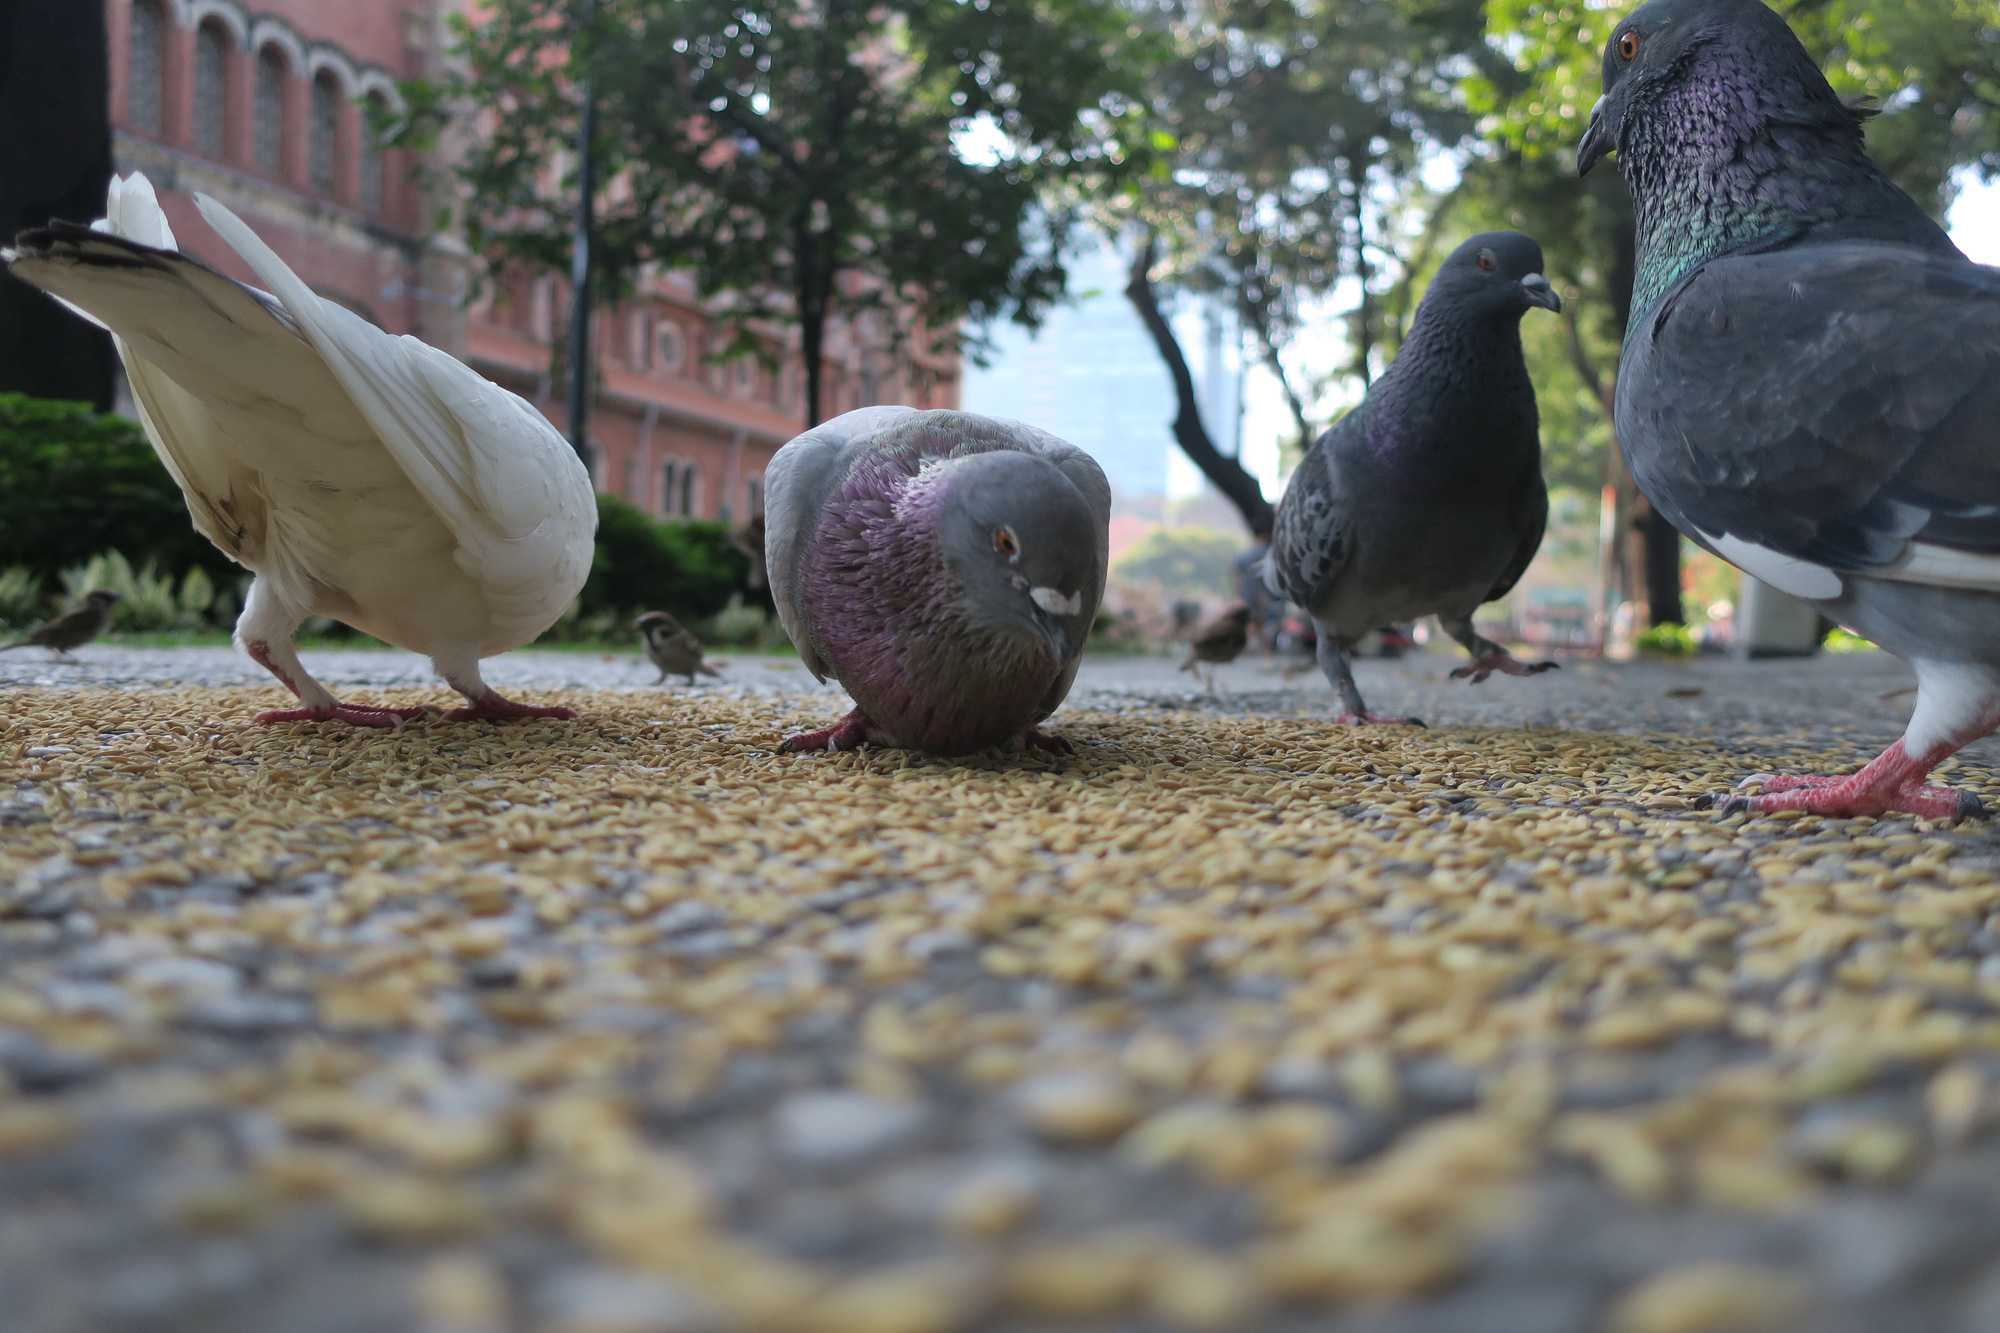 Pigeons feed on unhusked rice in April 30 Park in Ho Chi Minh City, Vietnam. Photo: T.T.D. / Tuoi Tre